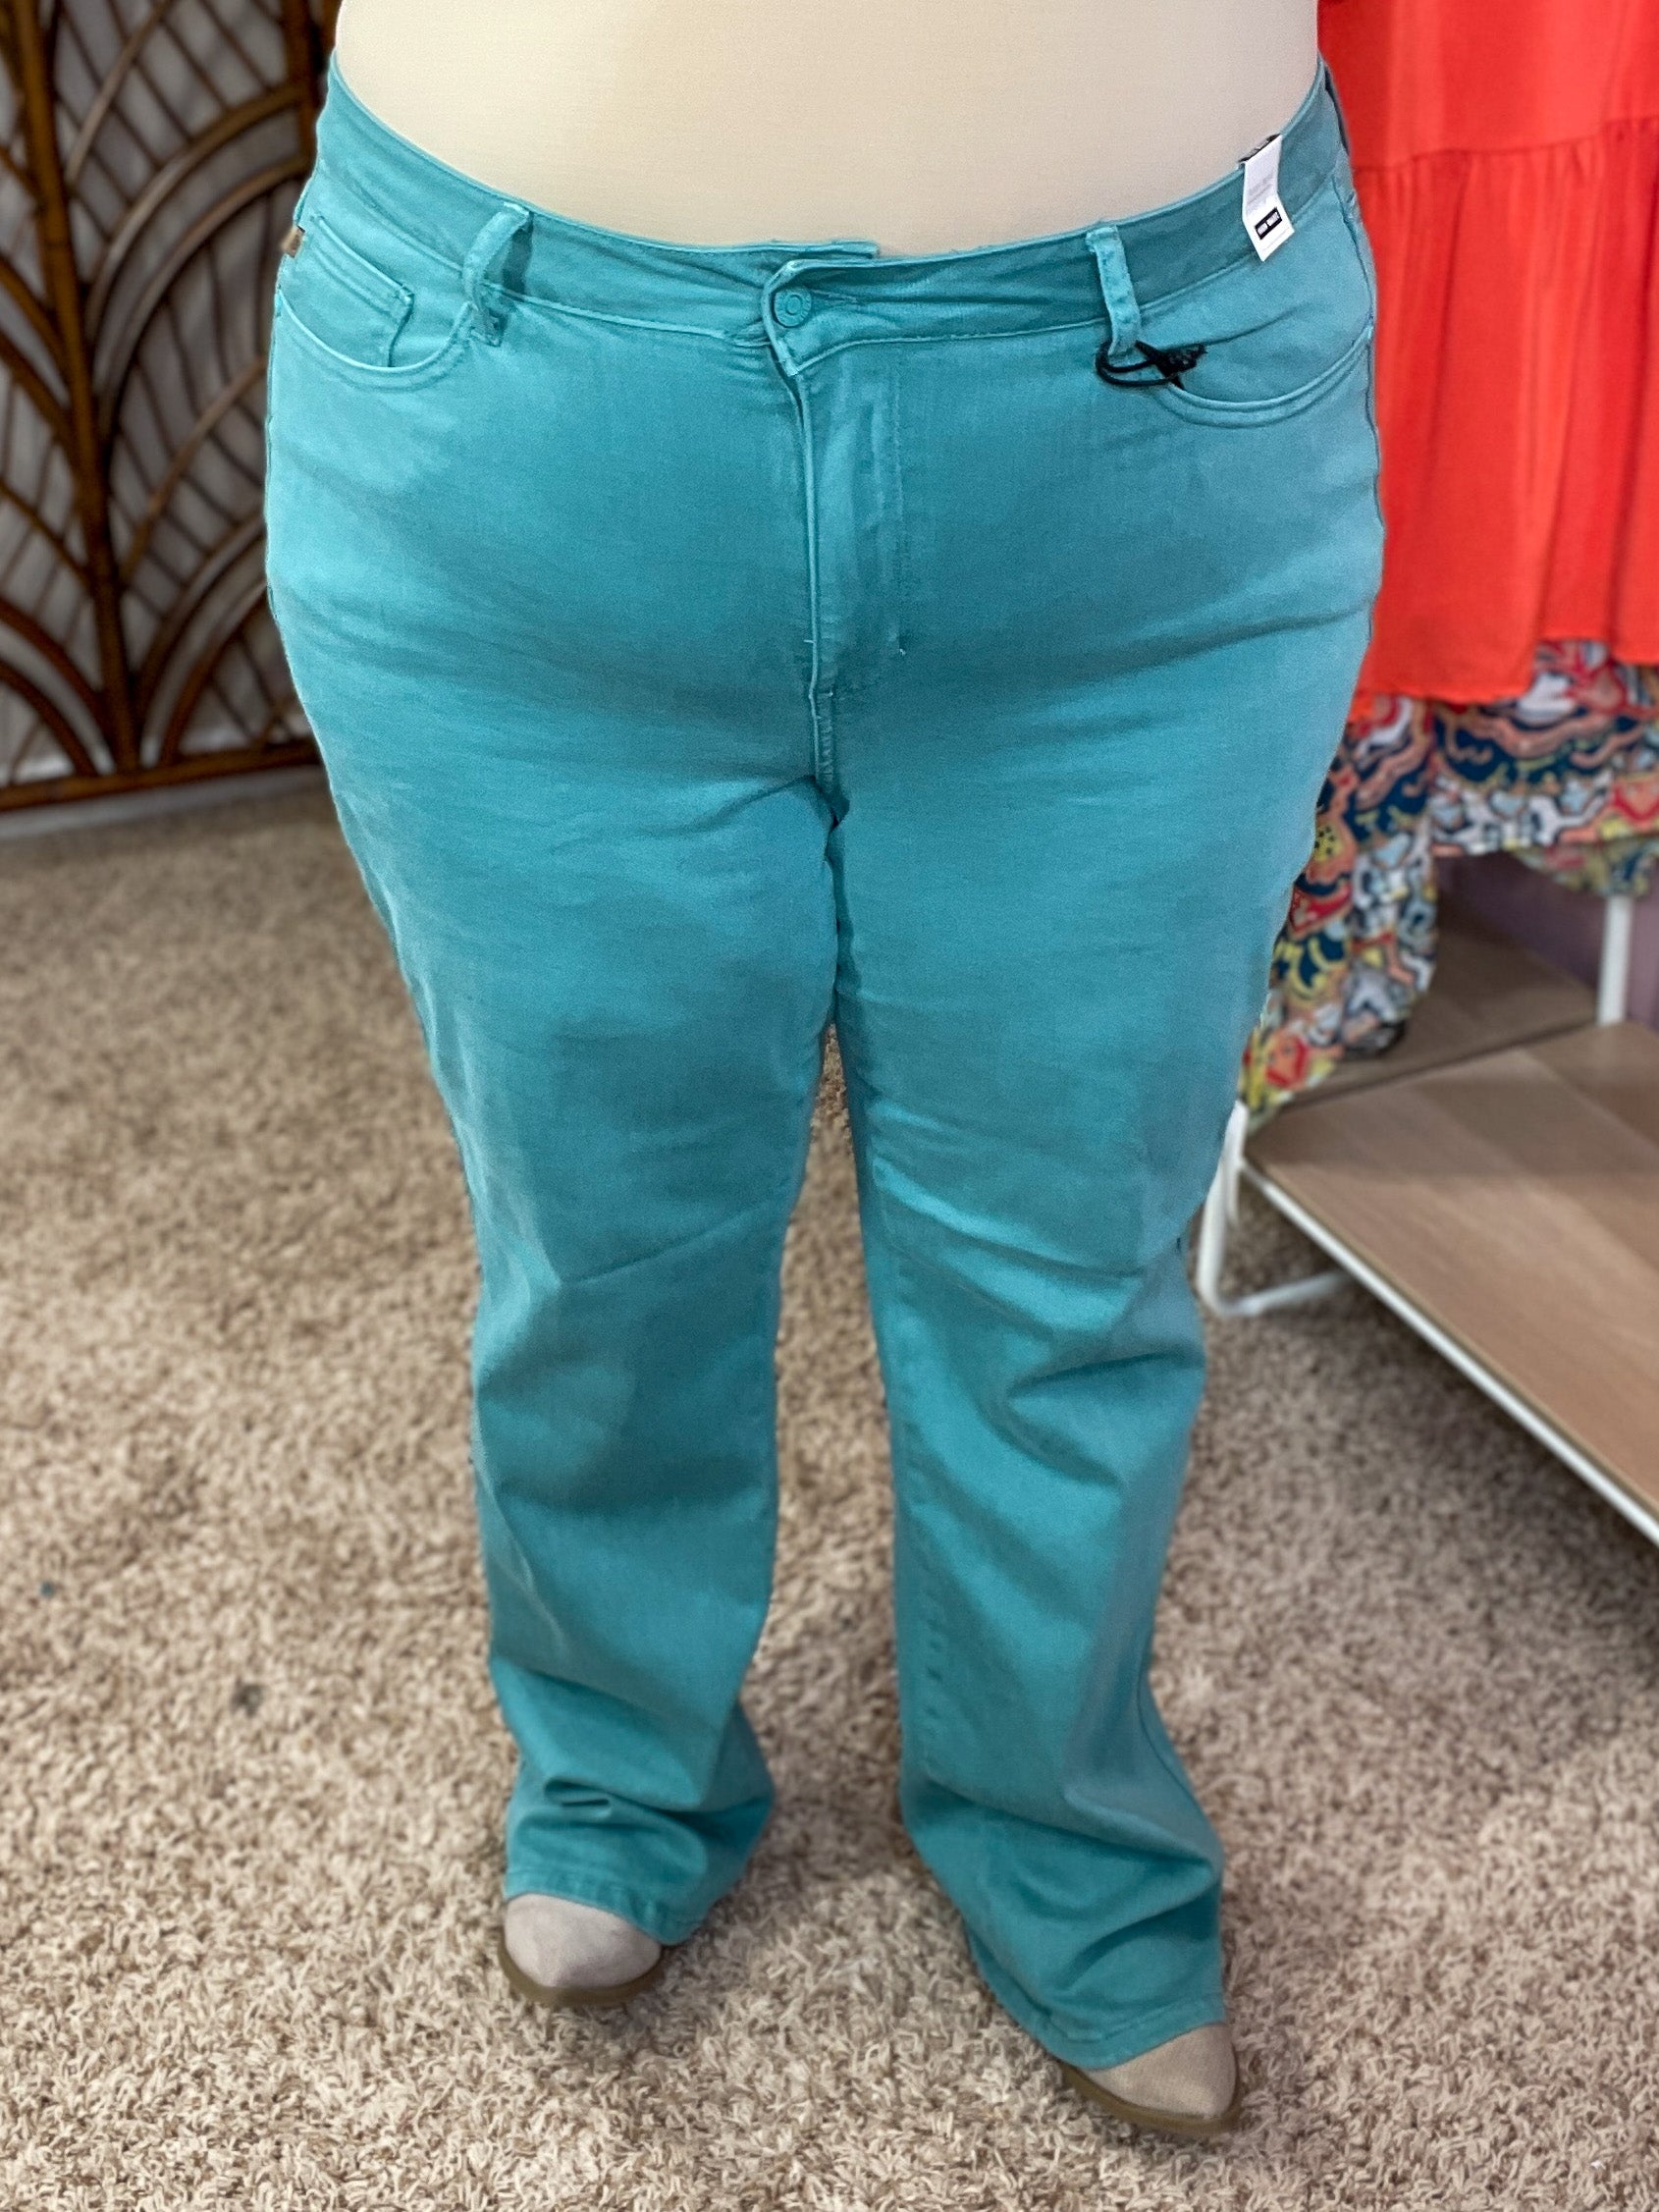 Mermaid Dreams Judy Blue Jeans - Sea Green Teal - Curved and Dangerous